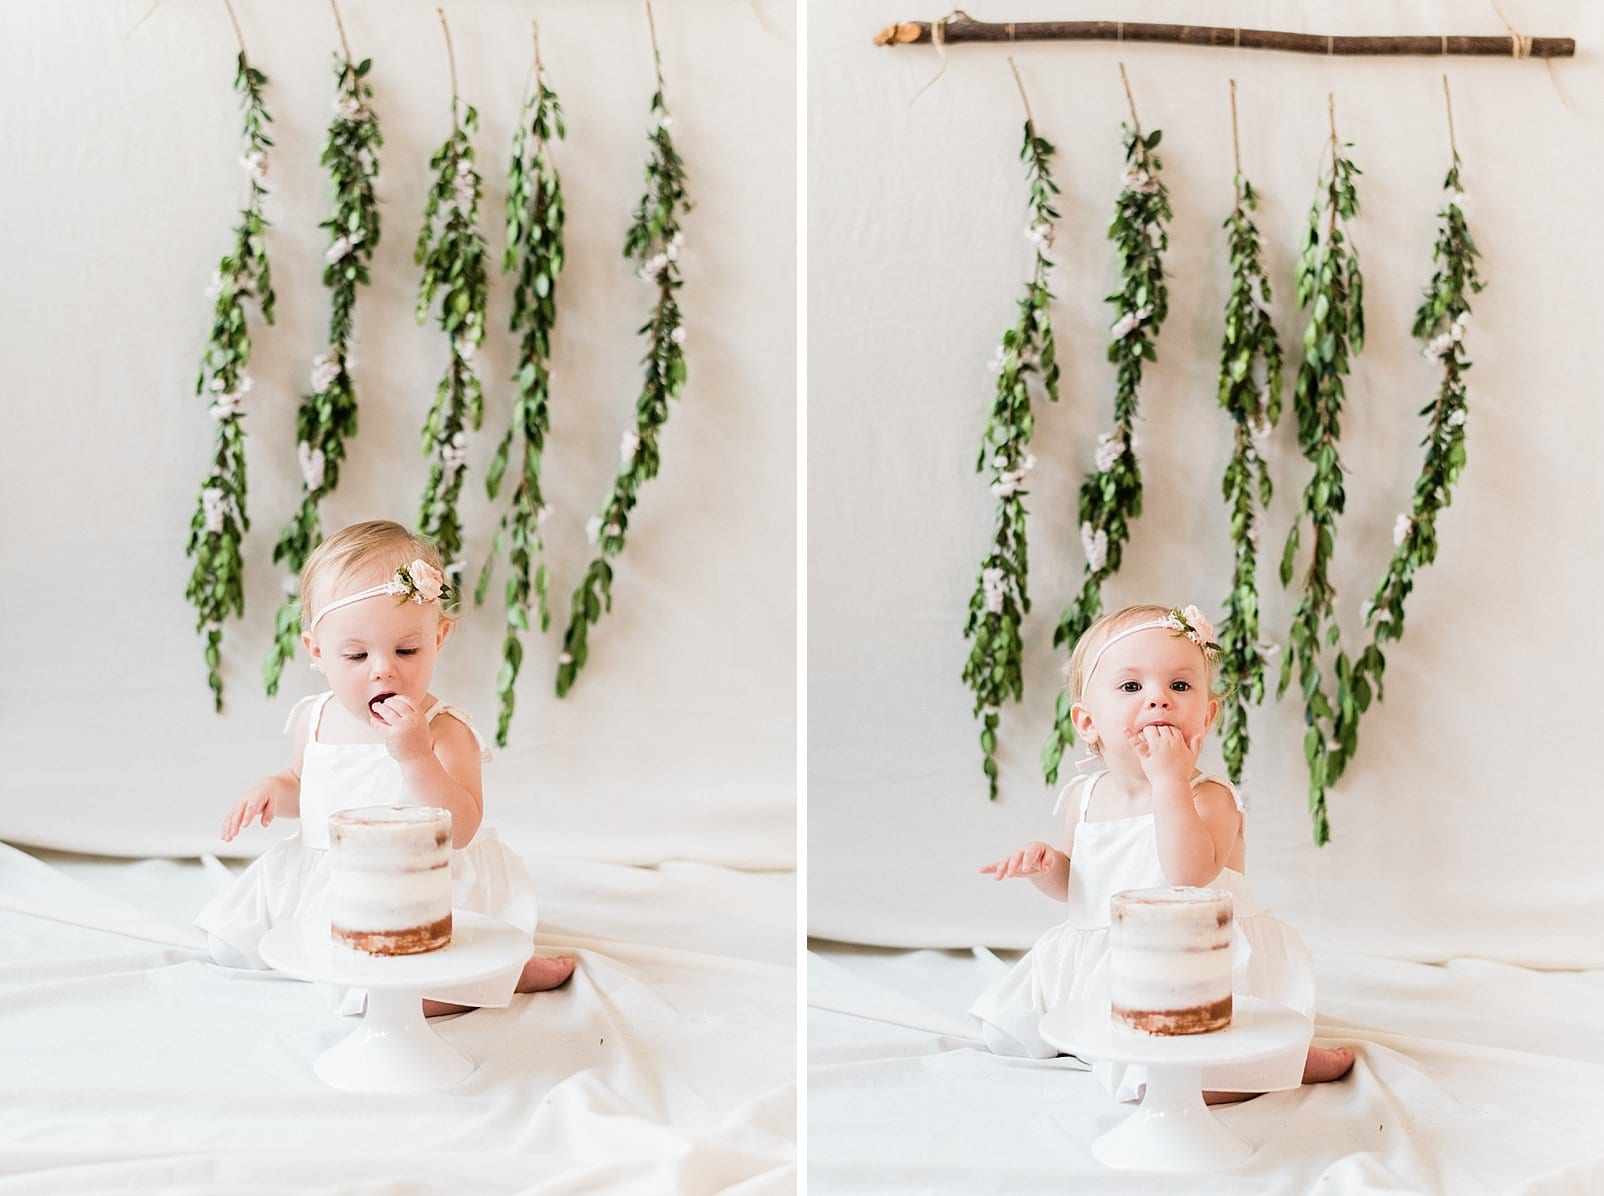 Raleigh 1 year old girl during her cake smash with greenery hanging down behind her photo